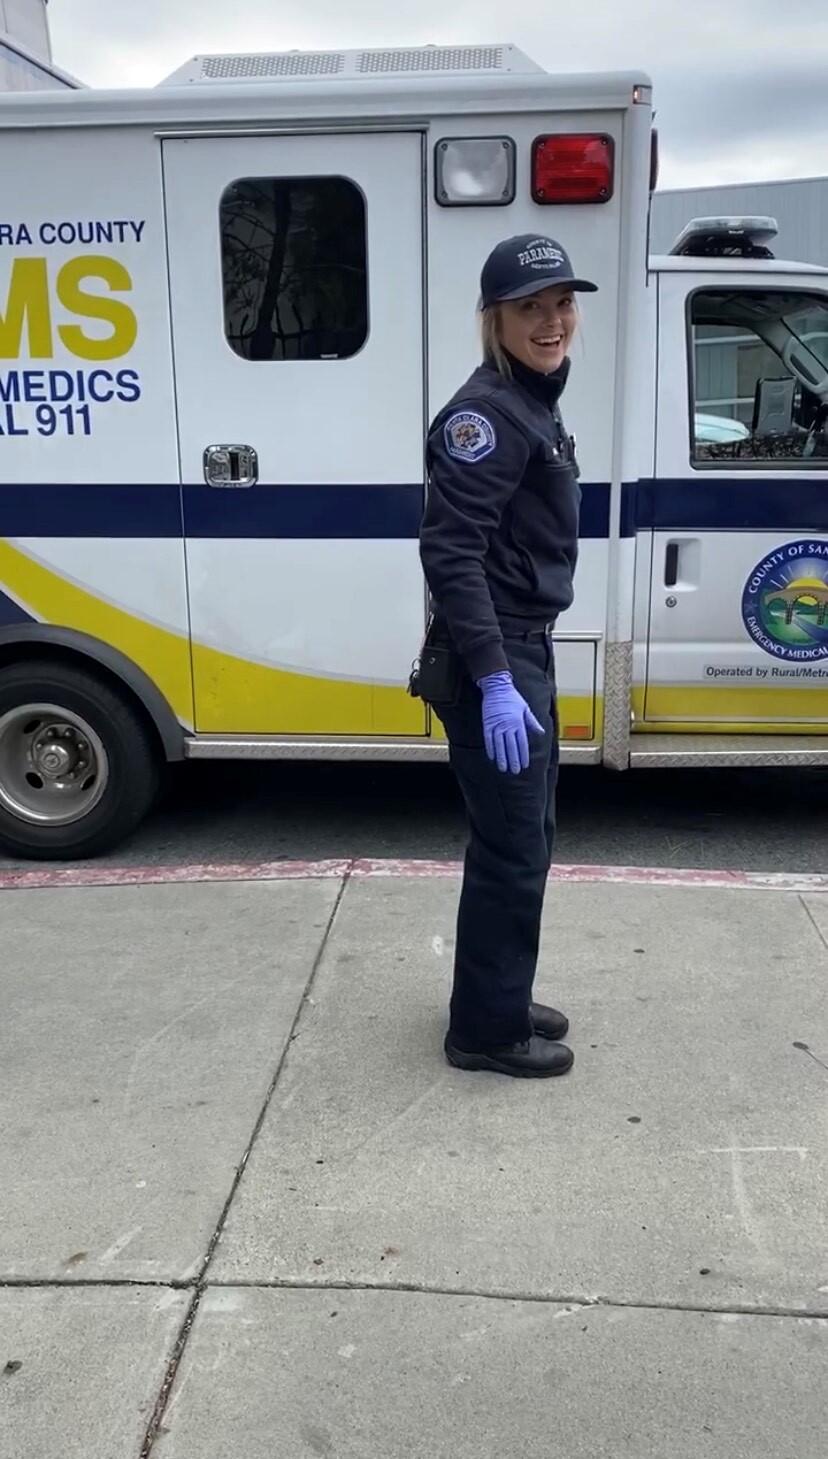 Morgan Sanders, a paramedic working in Santa Clara County, will pursue a registered nursing degree starting this summer at Pacific Union College in Napa County. (courtesy of Morgan Sanders)